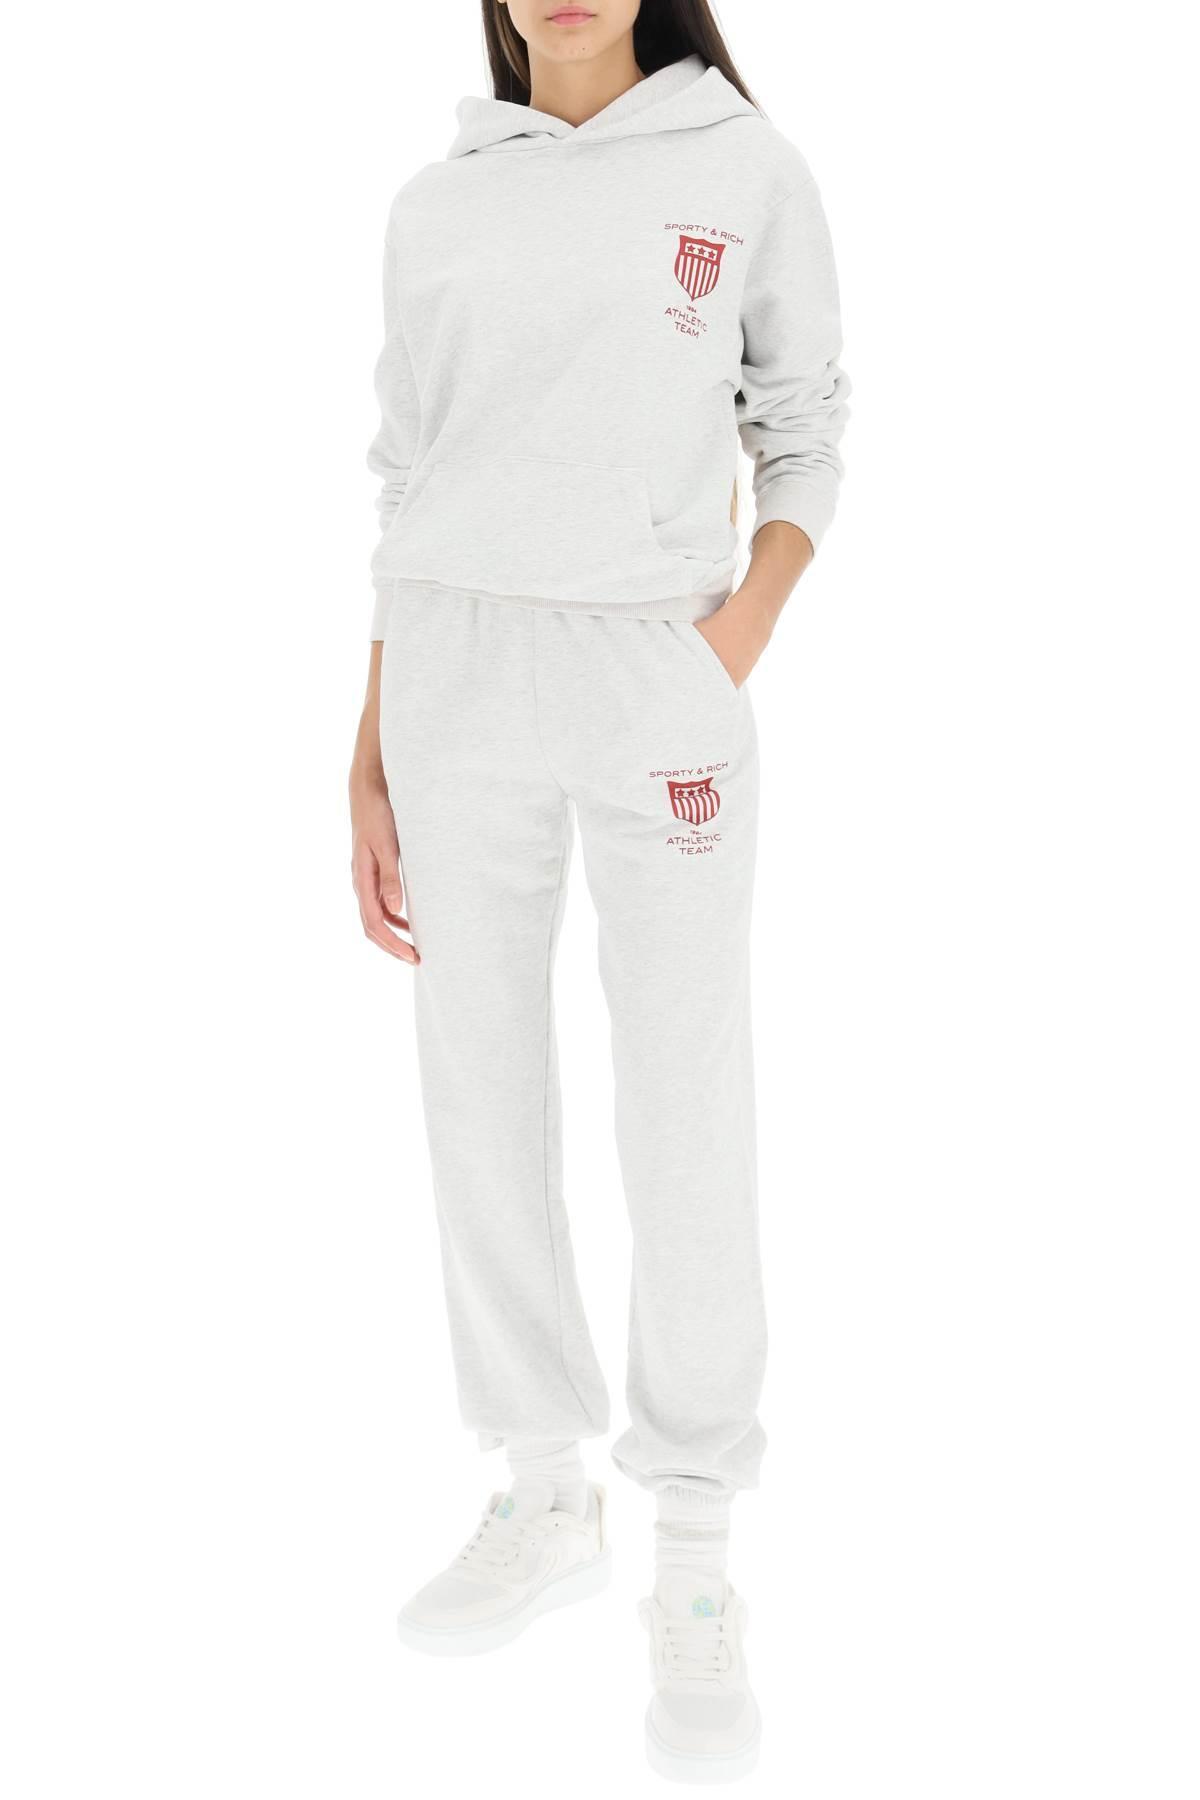 Sporty & Rich Athletic Team Sweatpants in White | Lyst